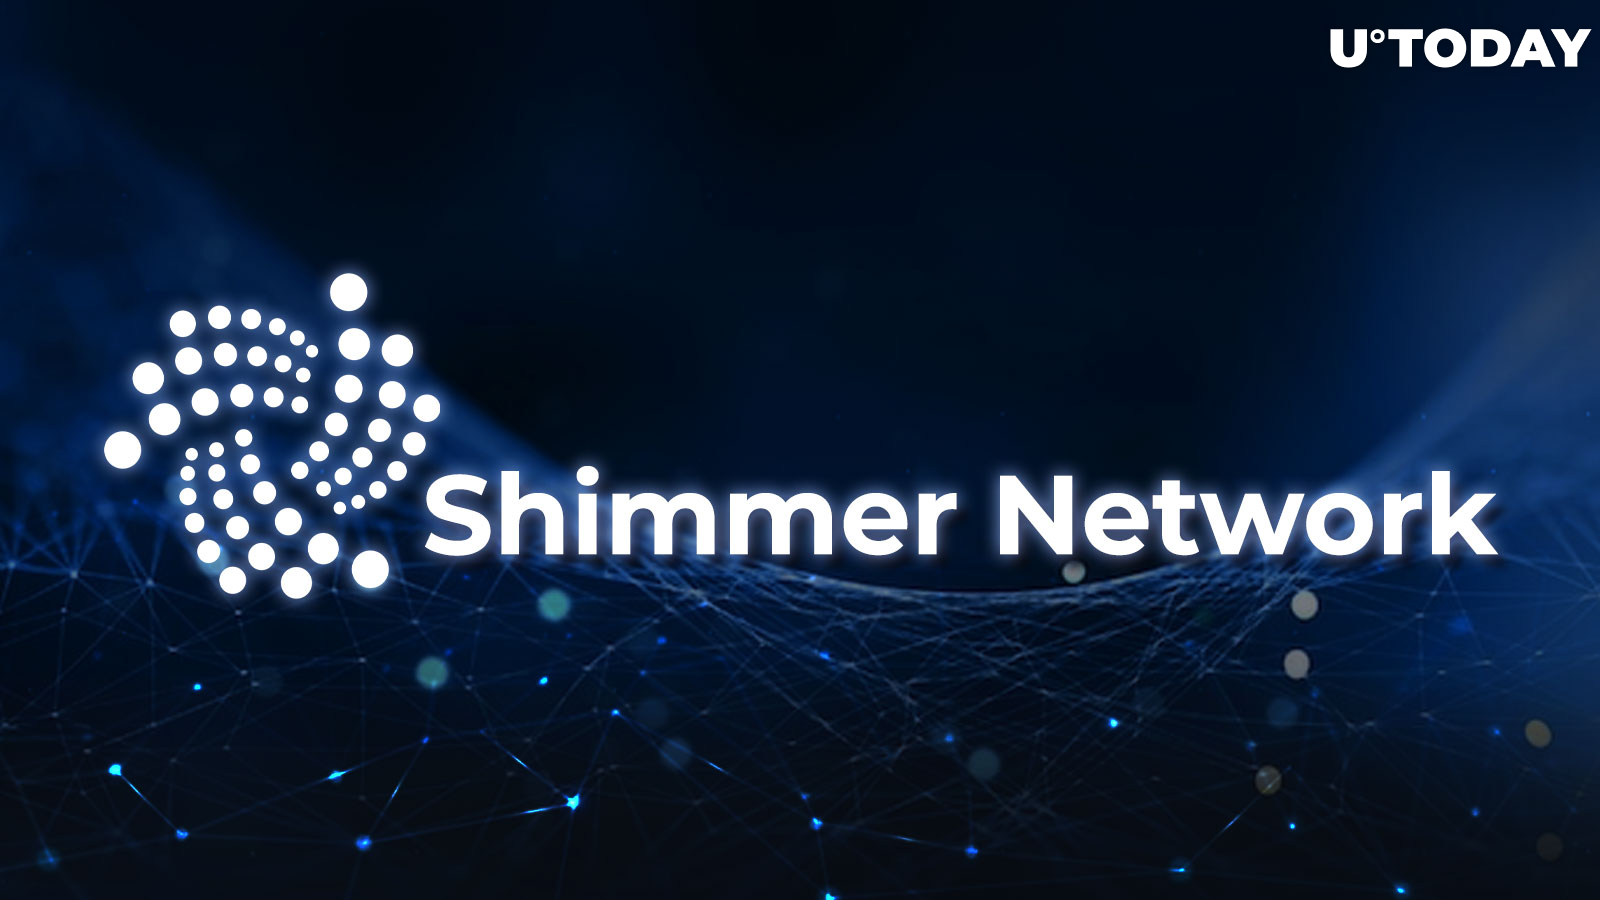 IOTA's Shimmer Network Officially Launches: Details